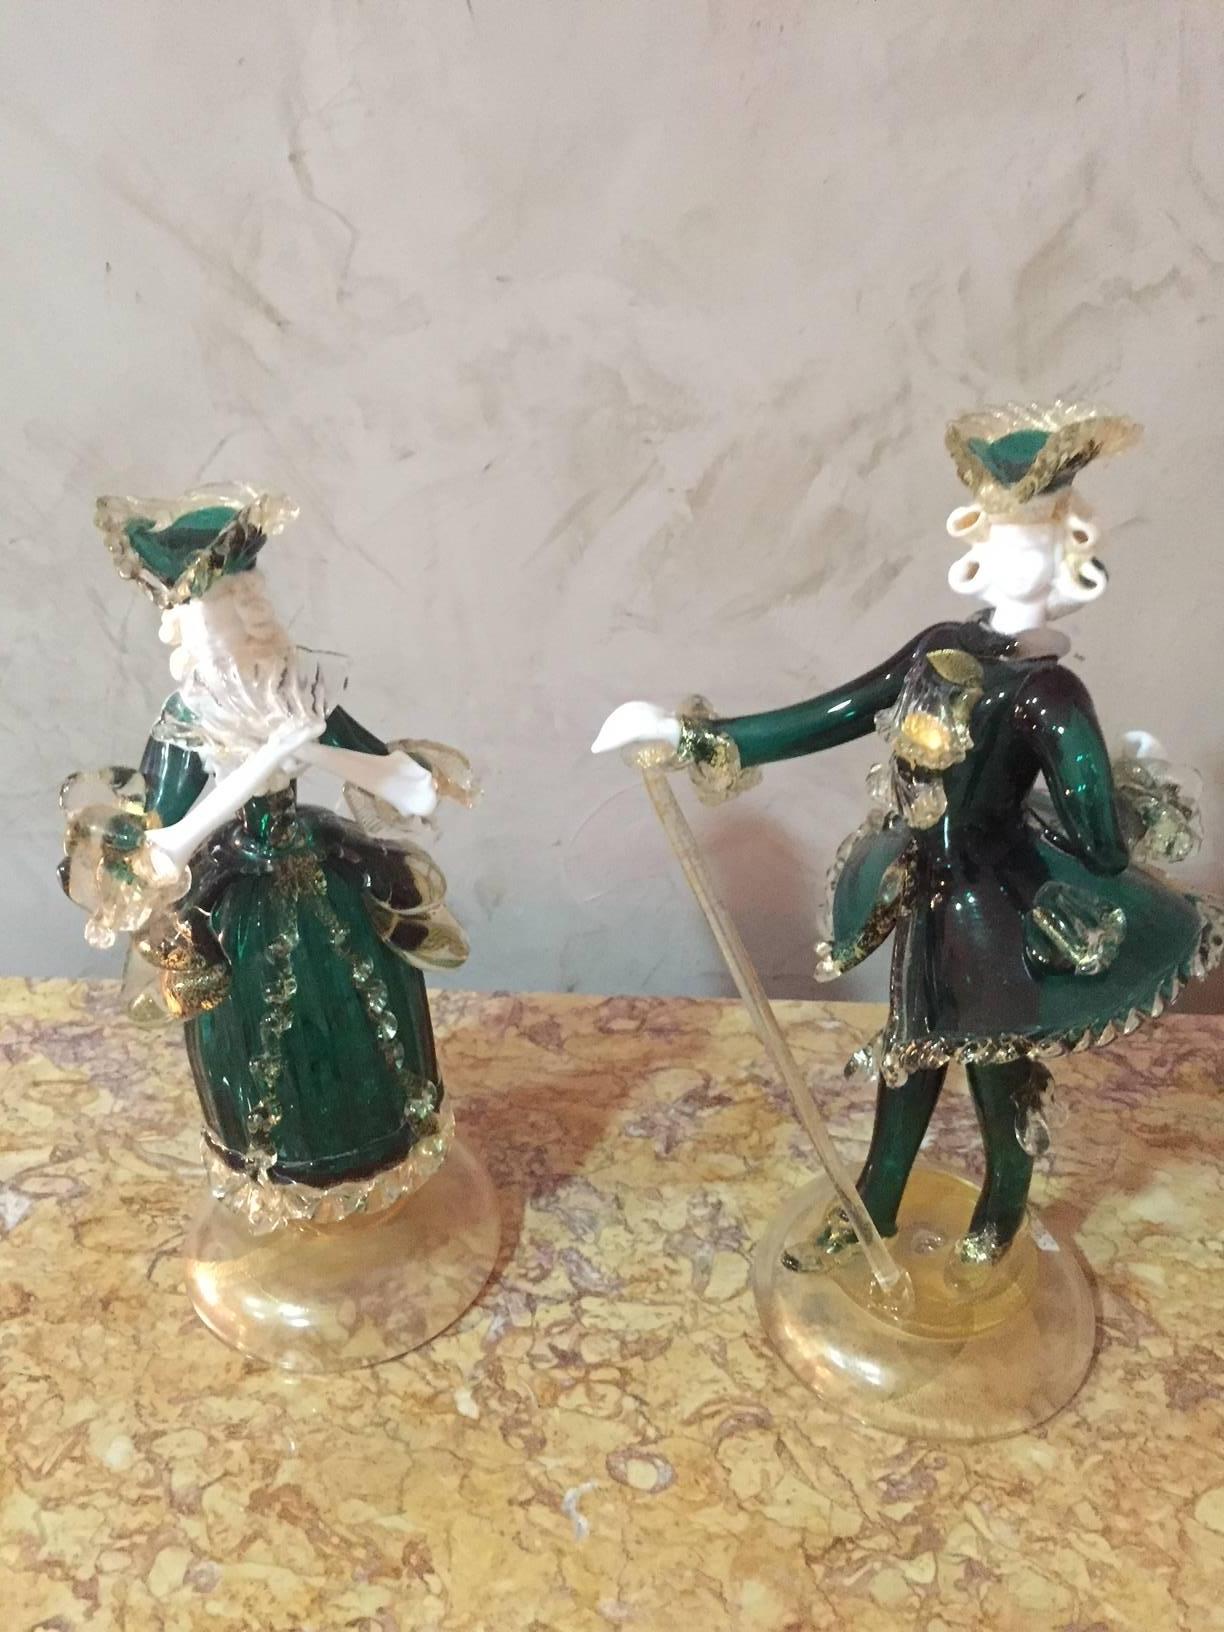 Venitian dancing couple in Murano glass, 1950s. Good condition, no broken elements.
Very delicate work. The couple is wearing traditional green clothes.
The Murano Island is known to make blown glass.